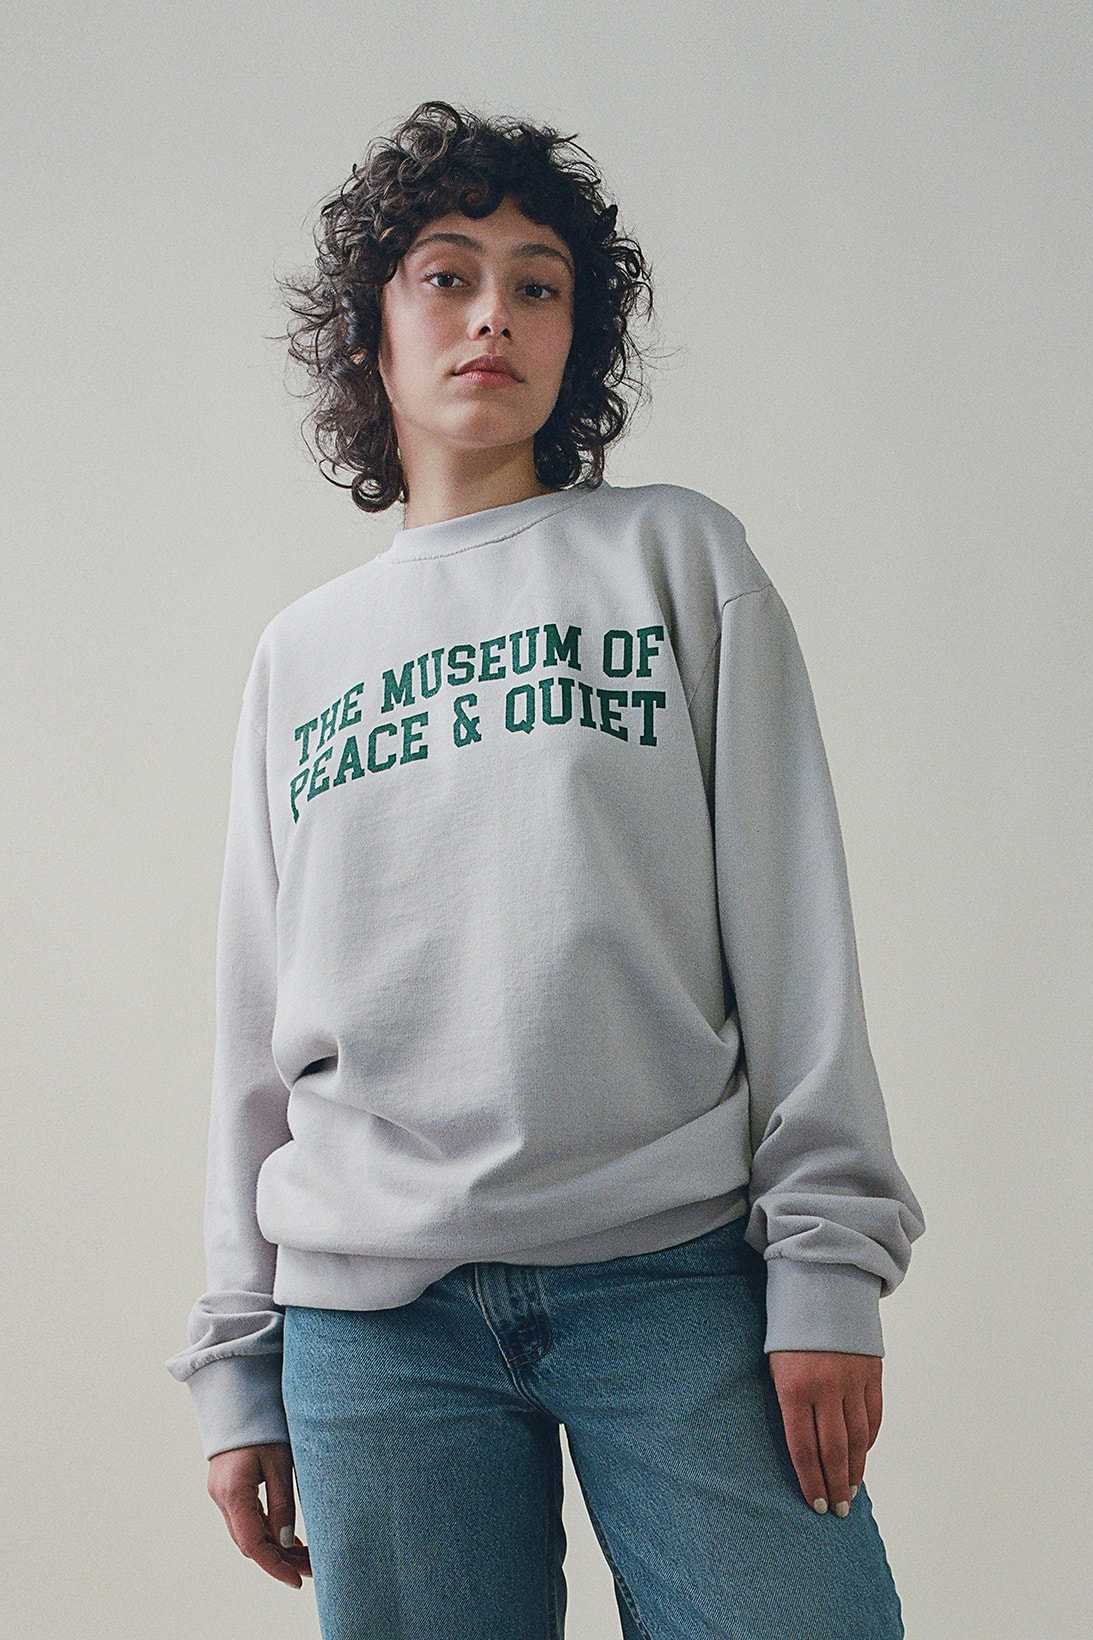 museum of peace and quiet mopq spring summer collection loungewear sweatshirt jeans